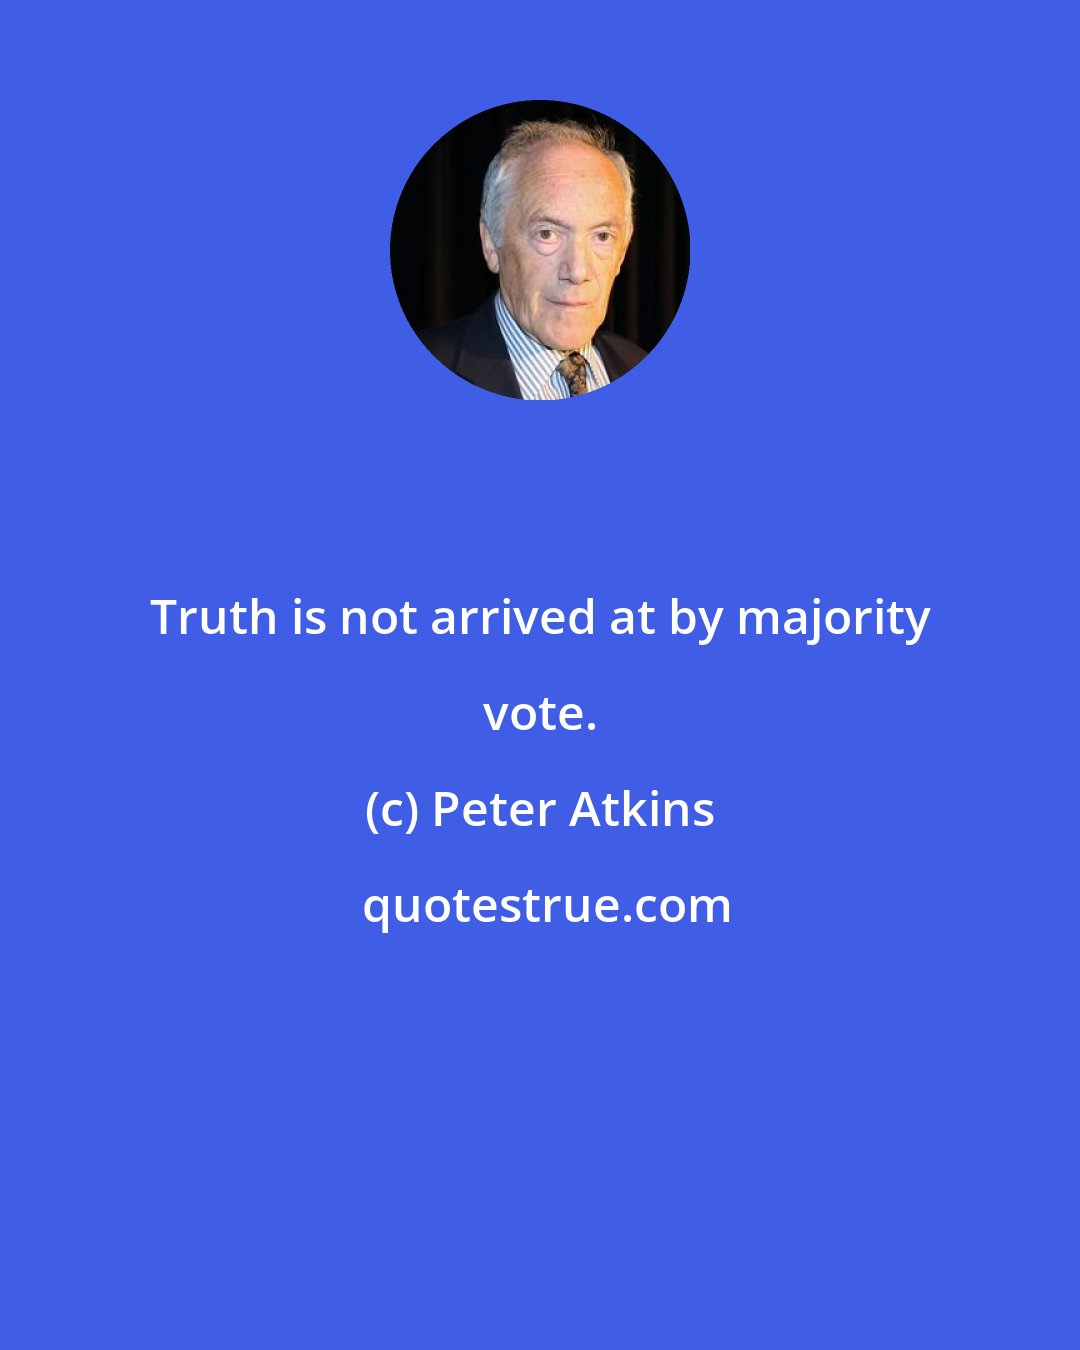 Peter Atkins: Truth is not arrived at by majority vote.